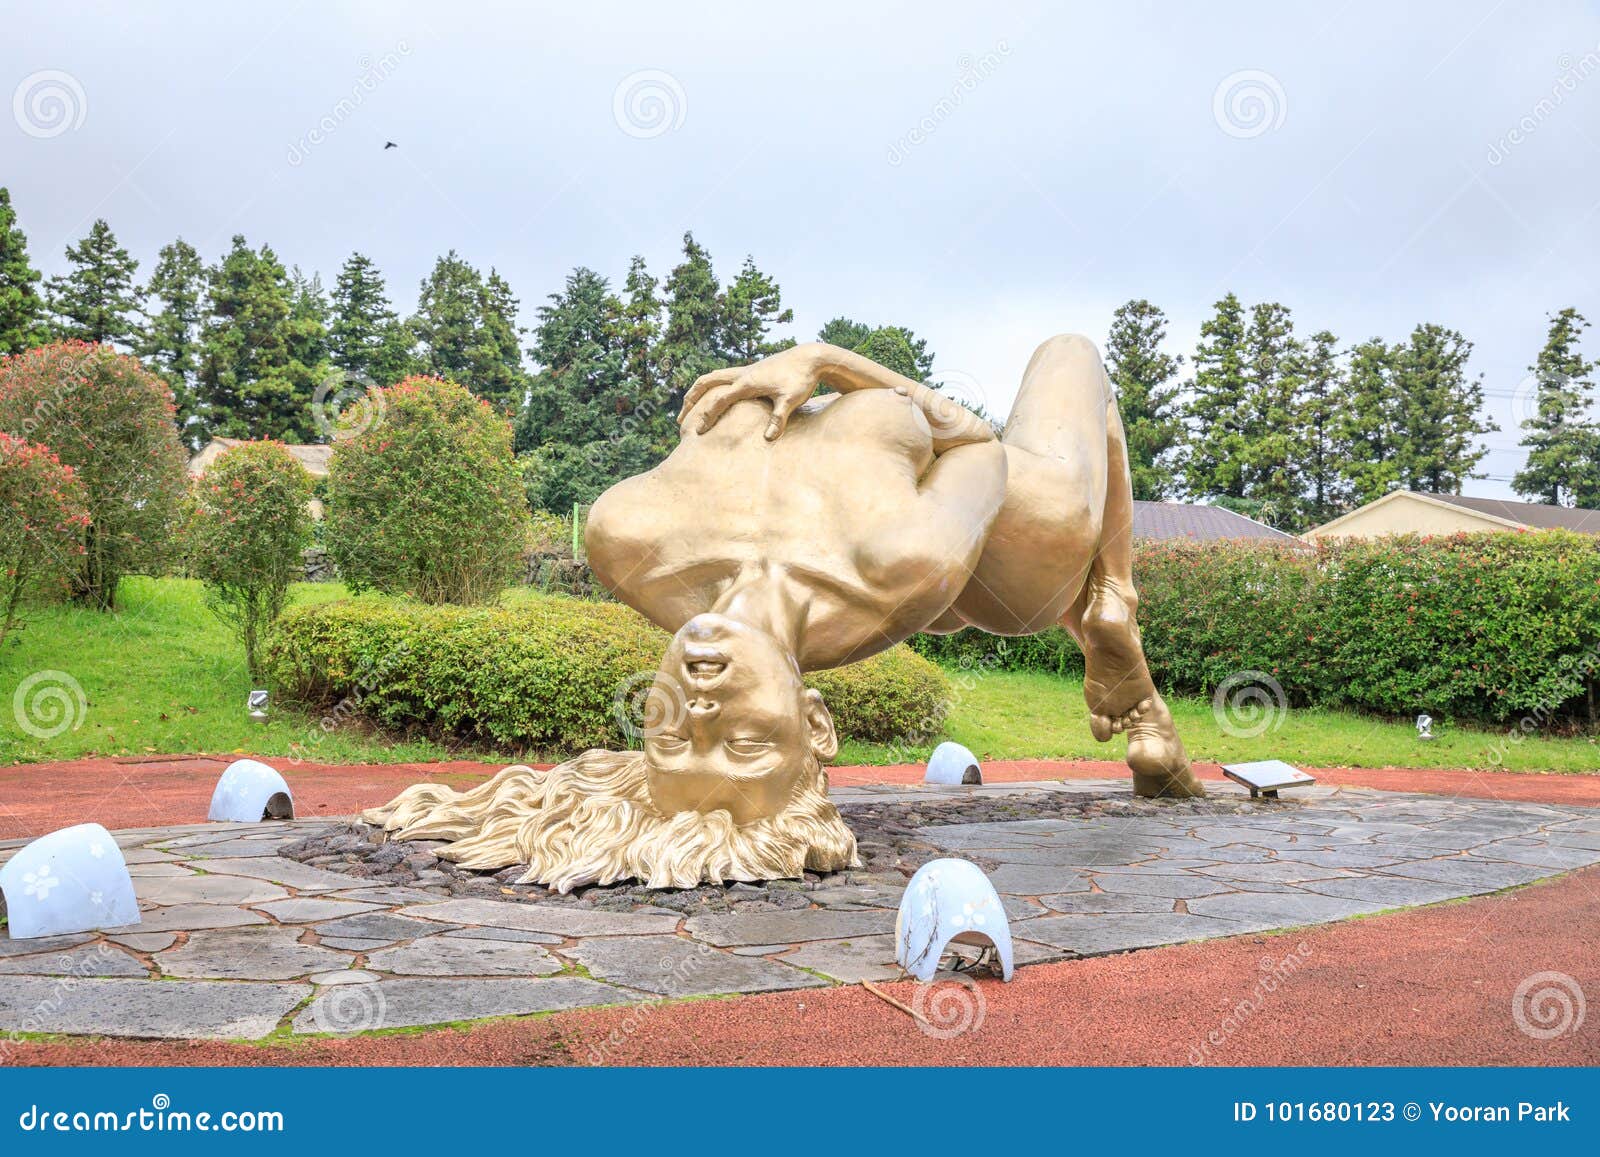 Jeju Love Land A Theme Sculpture Park Based On Sensuality And E Editorial Stock Photo Image Of Landscape Activity